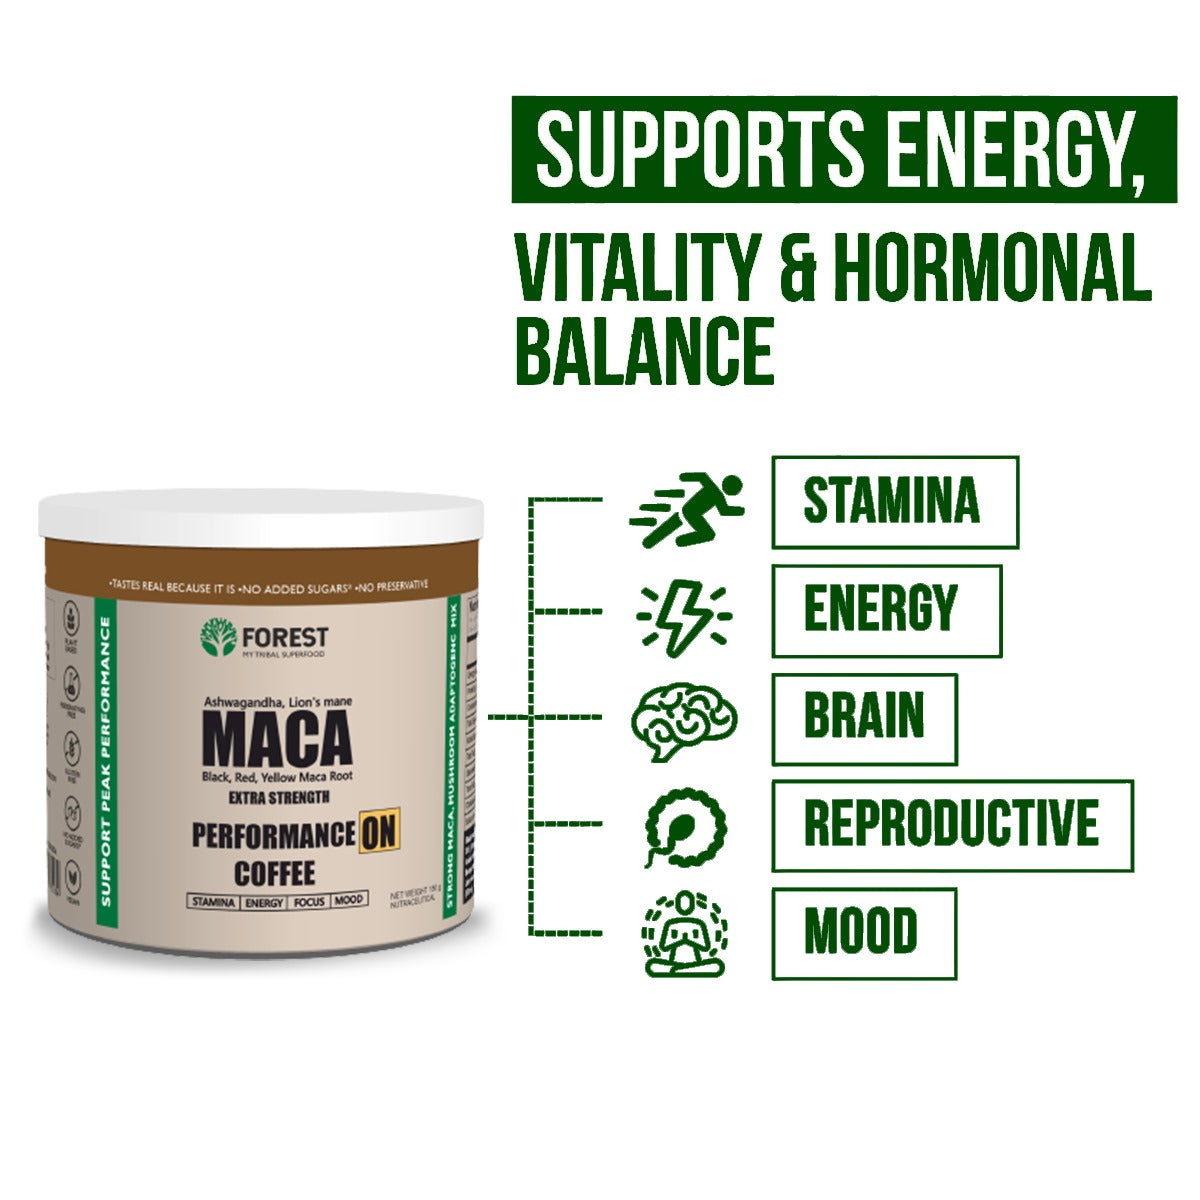 Forest Instant Maca Coffee for Men and Women